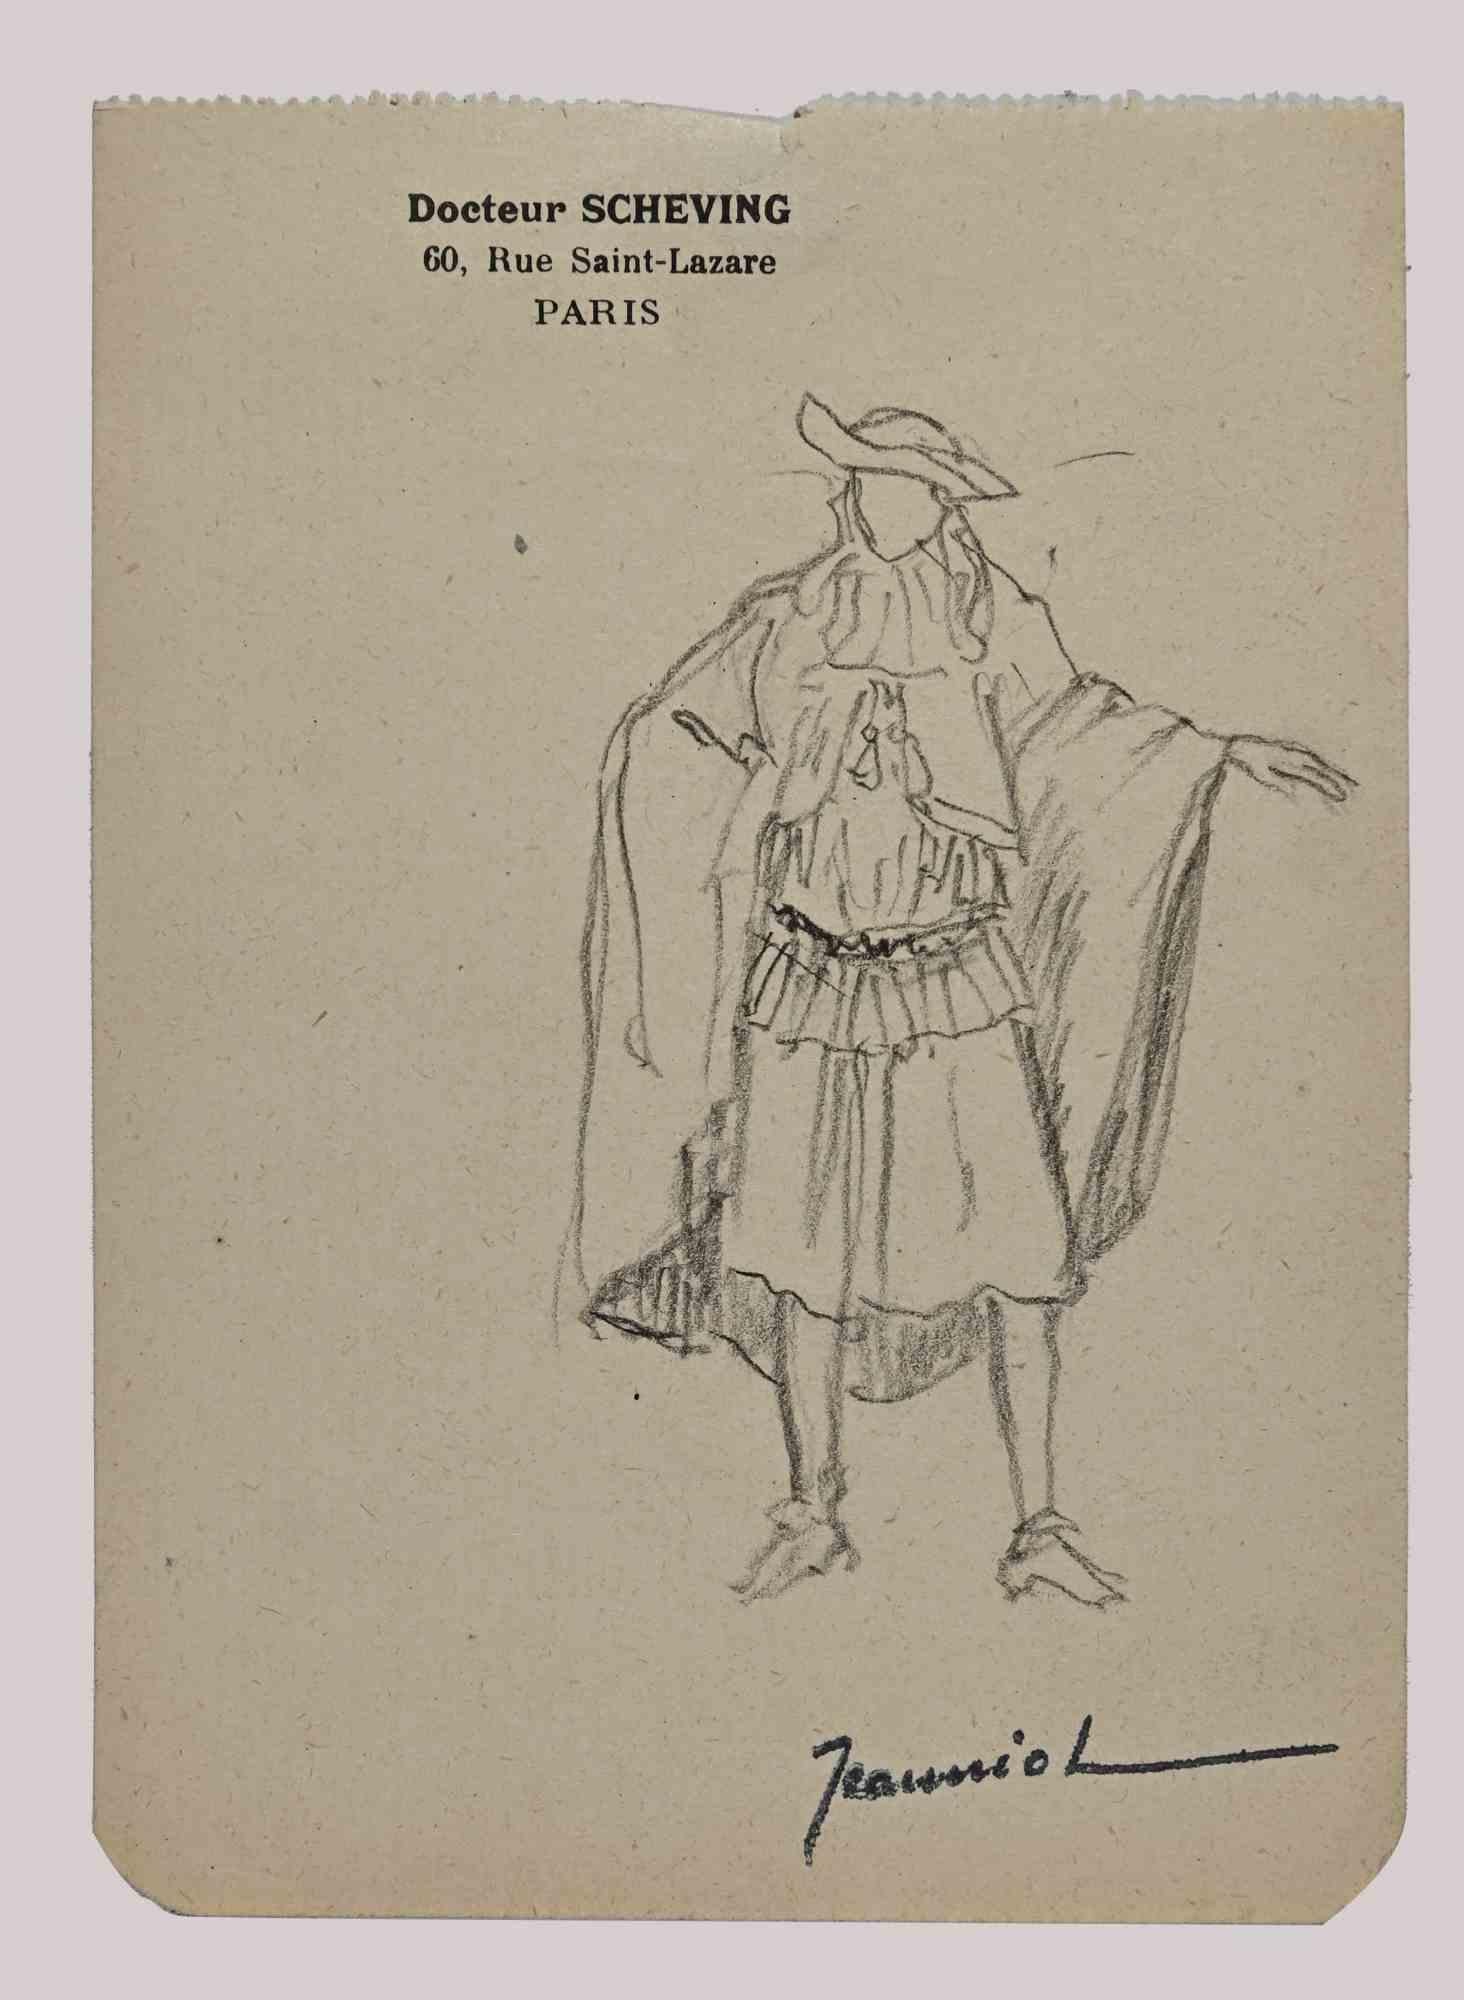 Man is an original Drawing on paper realized by the painter Pierre Georges Jeanniot (1848-1934).

Drawing in pencil.

Hand-signed on the lower.

Good conditions except for consumed margins.

The artwork is represented through deft and quick strokes